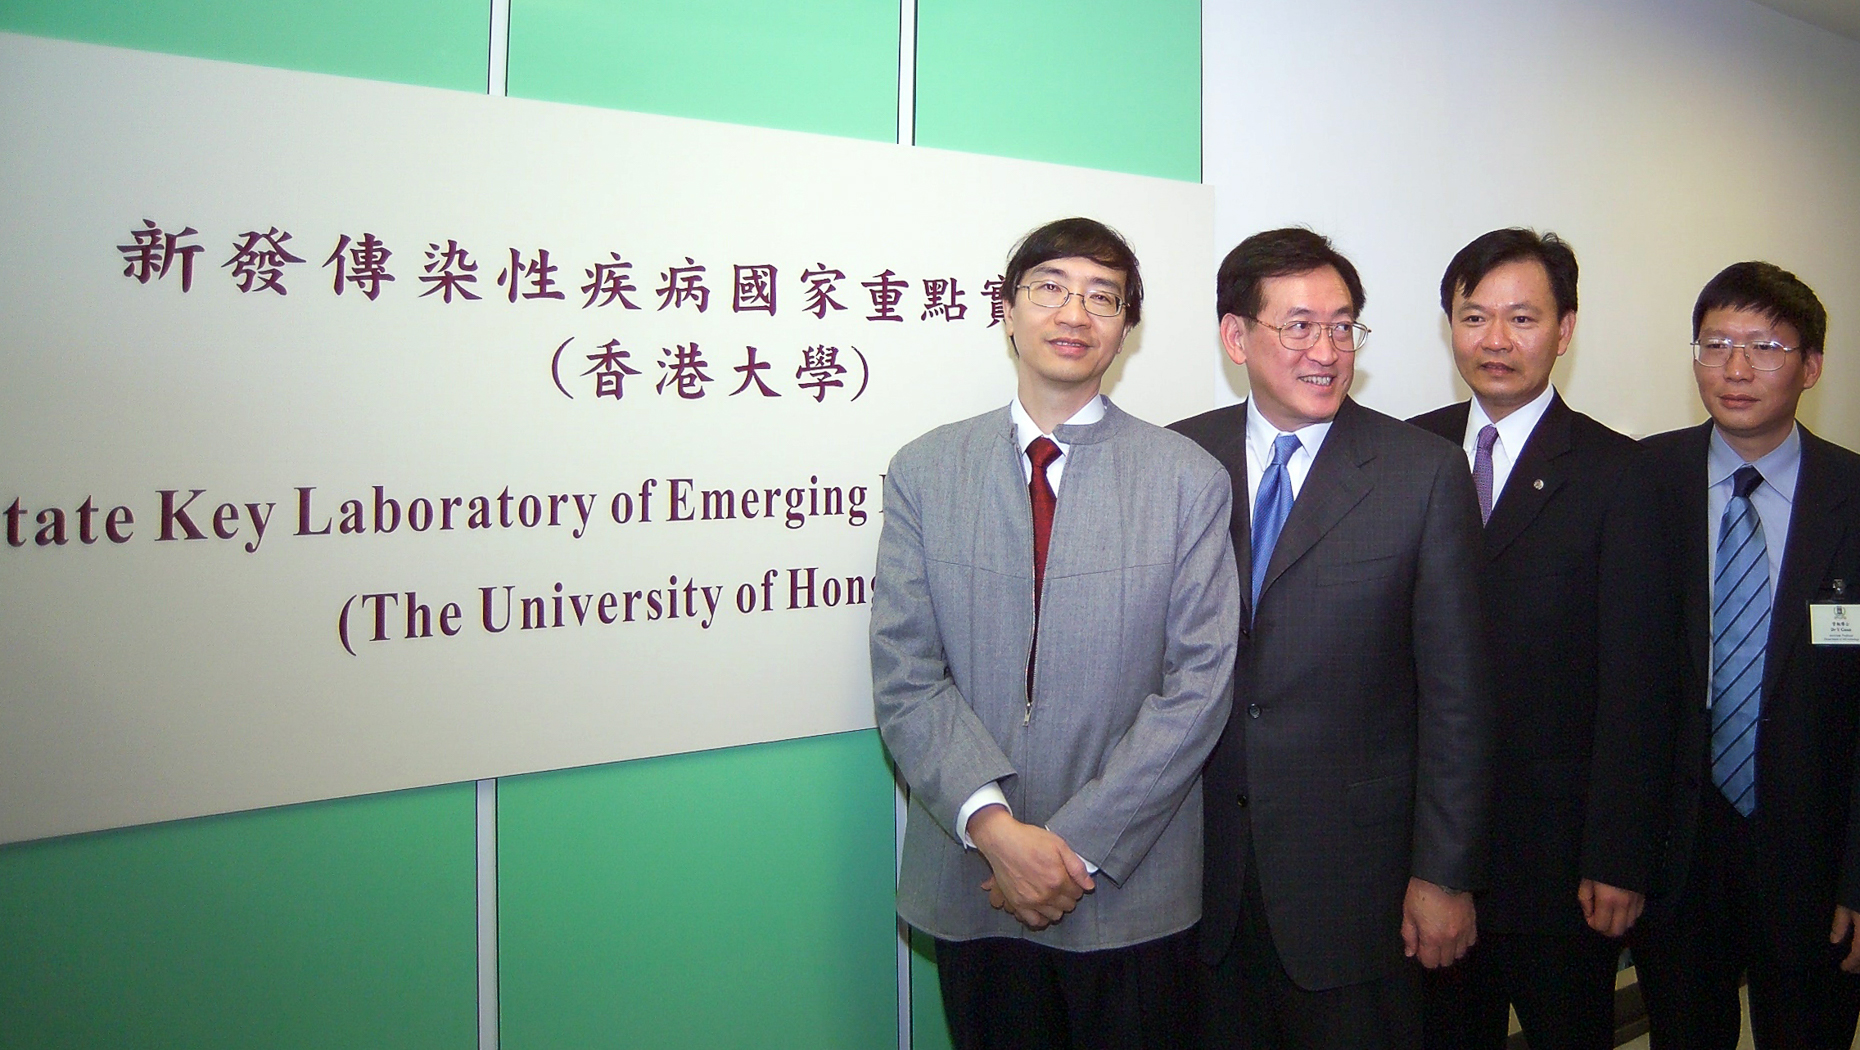 State Key Laboratories of Emerging Infectious Diseases and Brain and Cognitive Sciences are established